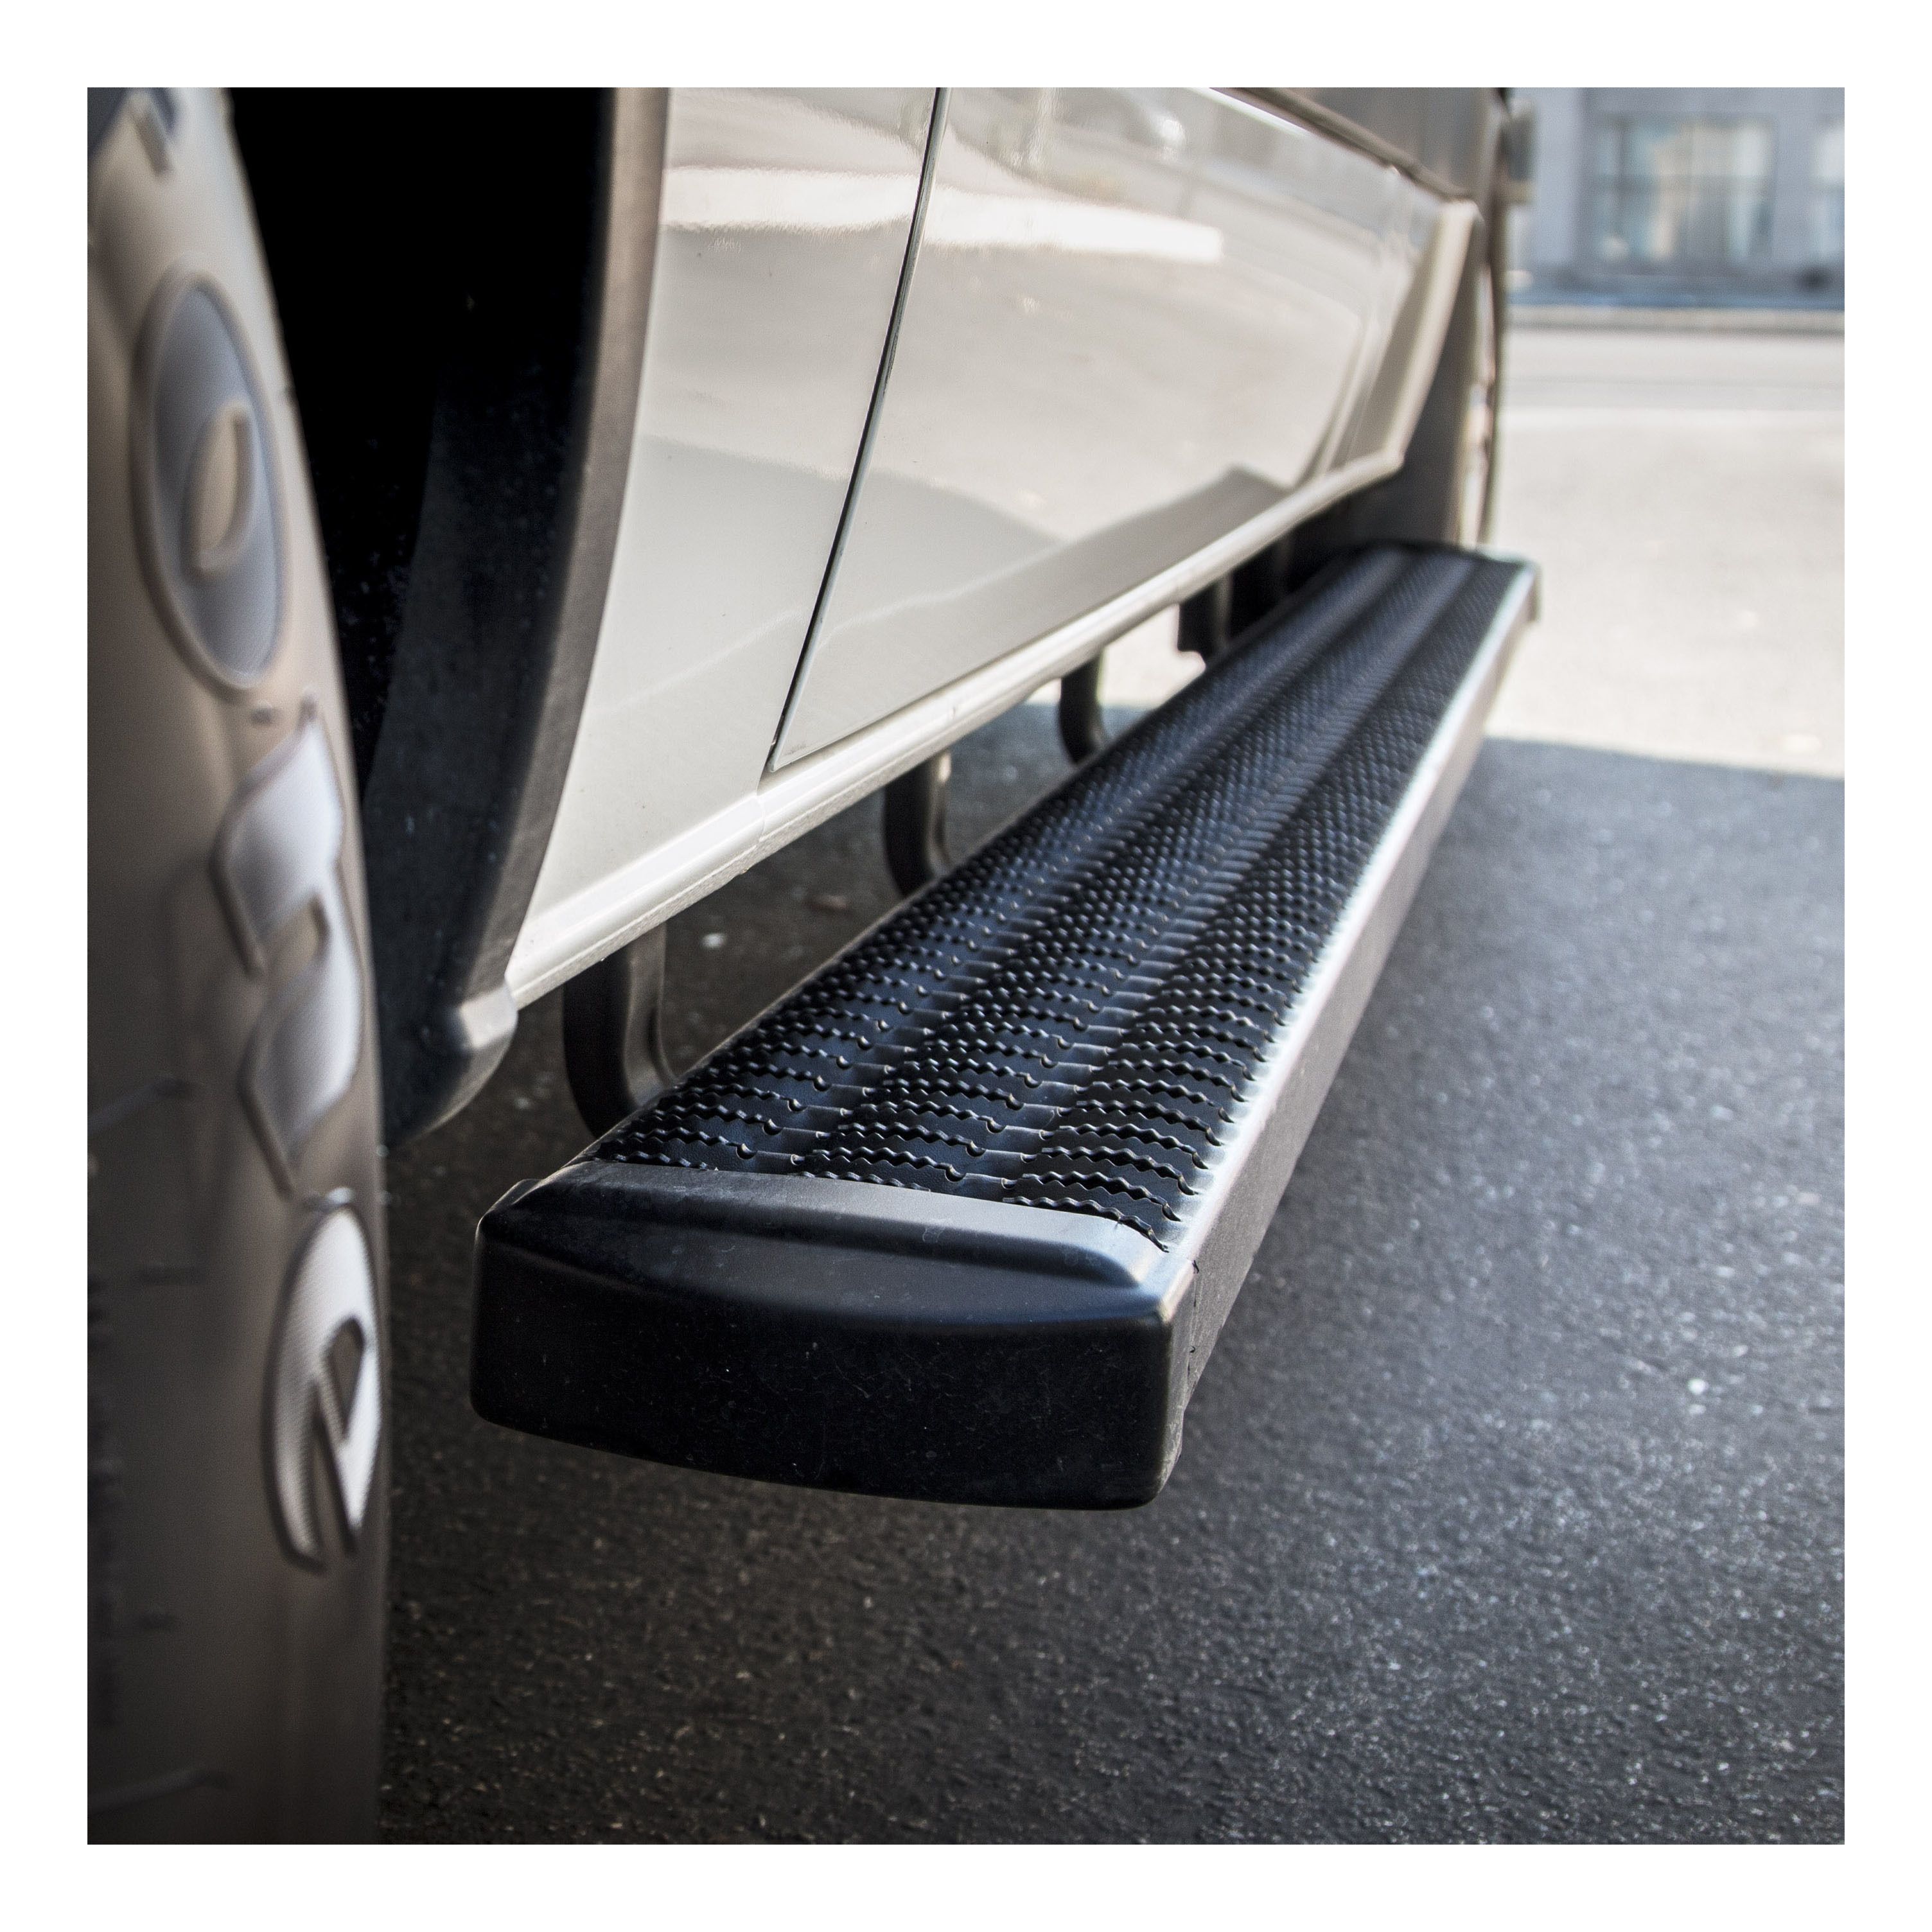 2007-2013 Chevrolet Silverado 1500 Ext Cab Grip Step 7" Running Boards Black Textured Luverne Running Boards For 2011 Chevy Silverado Extended Cab